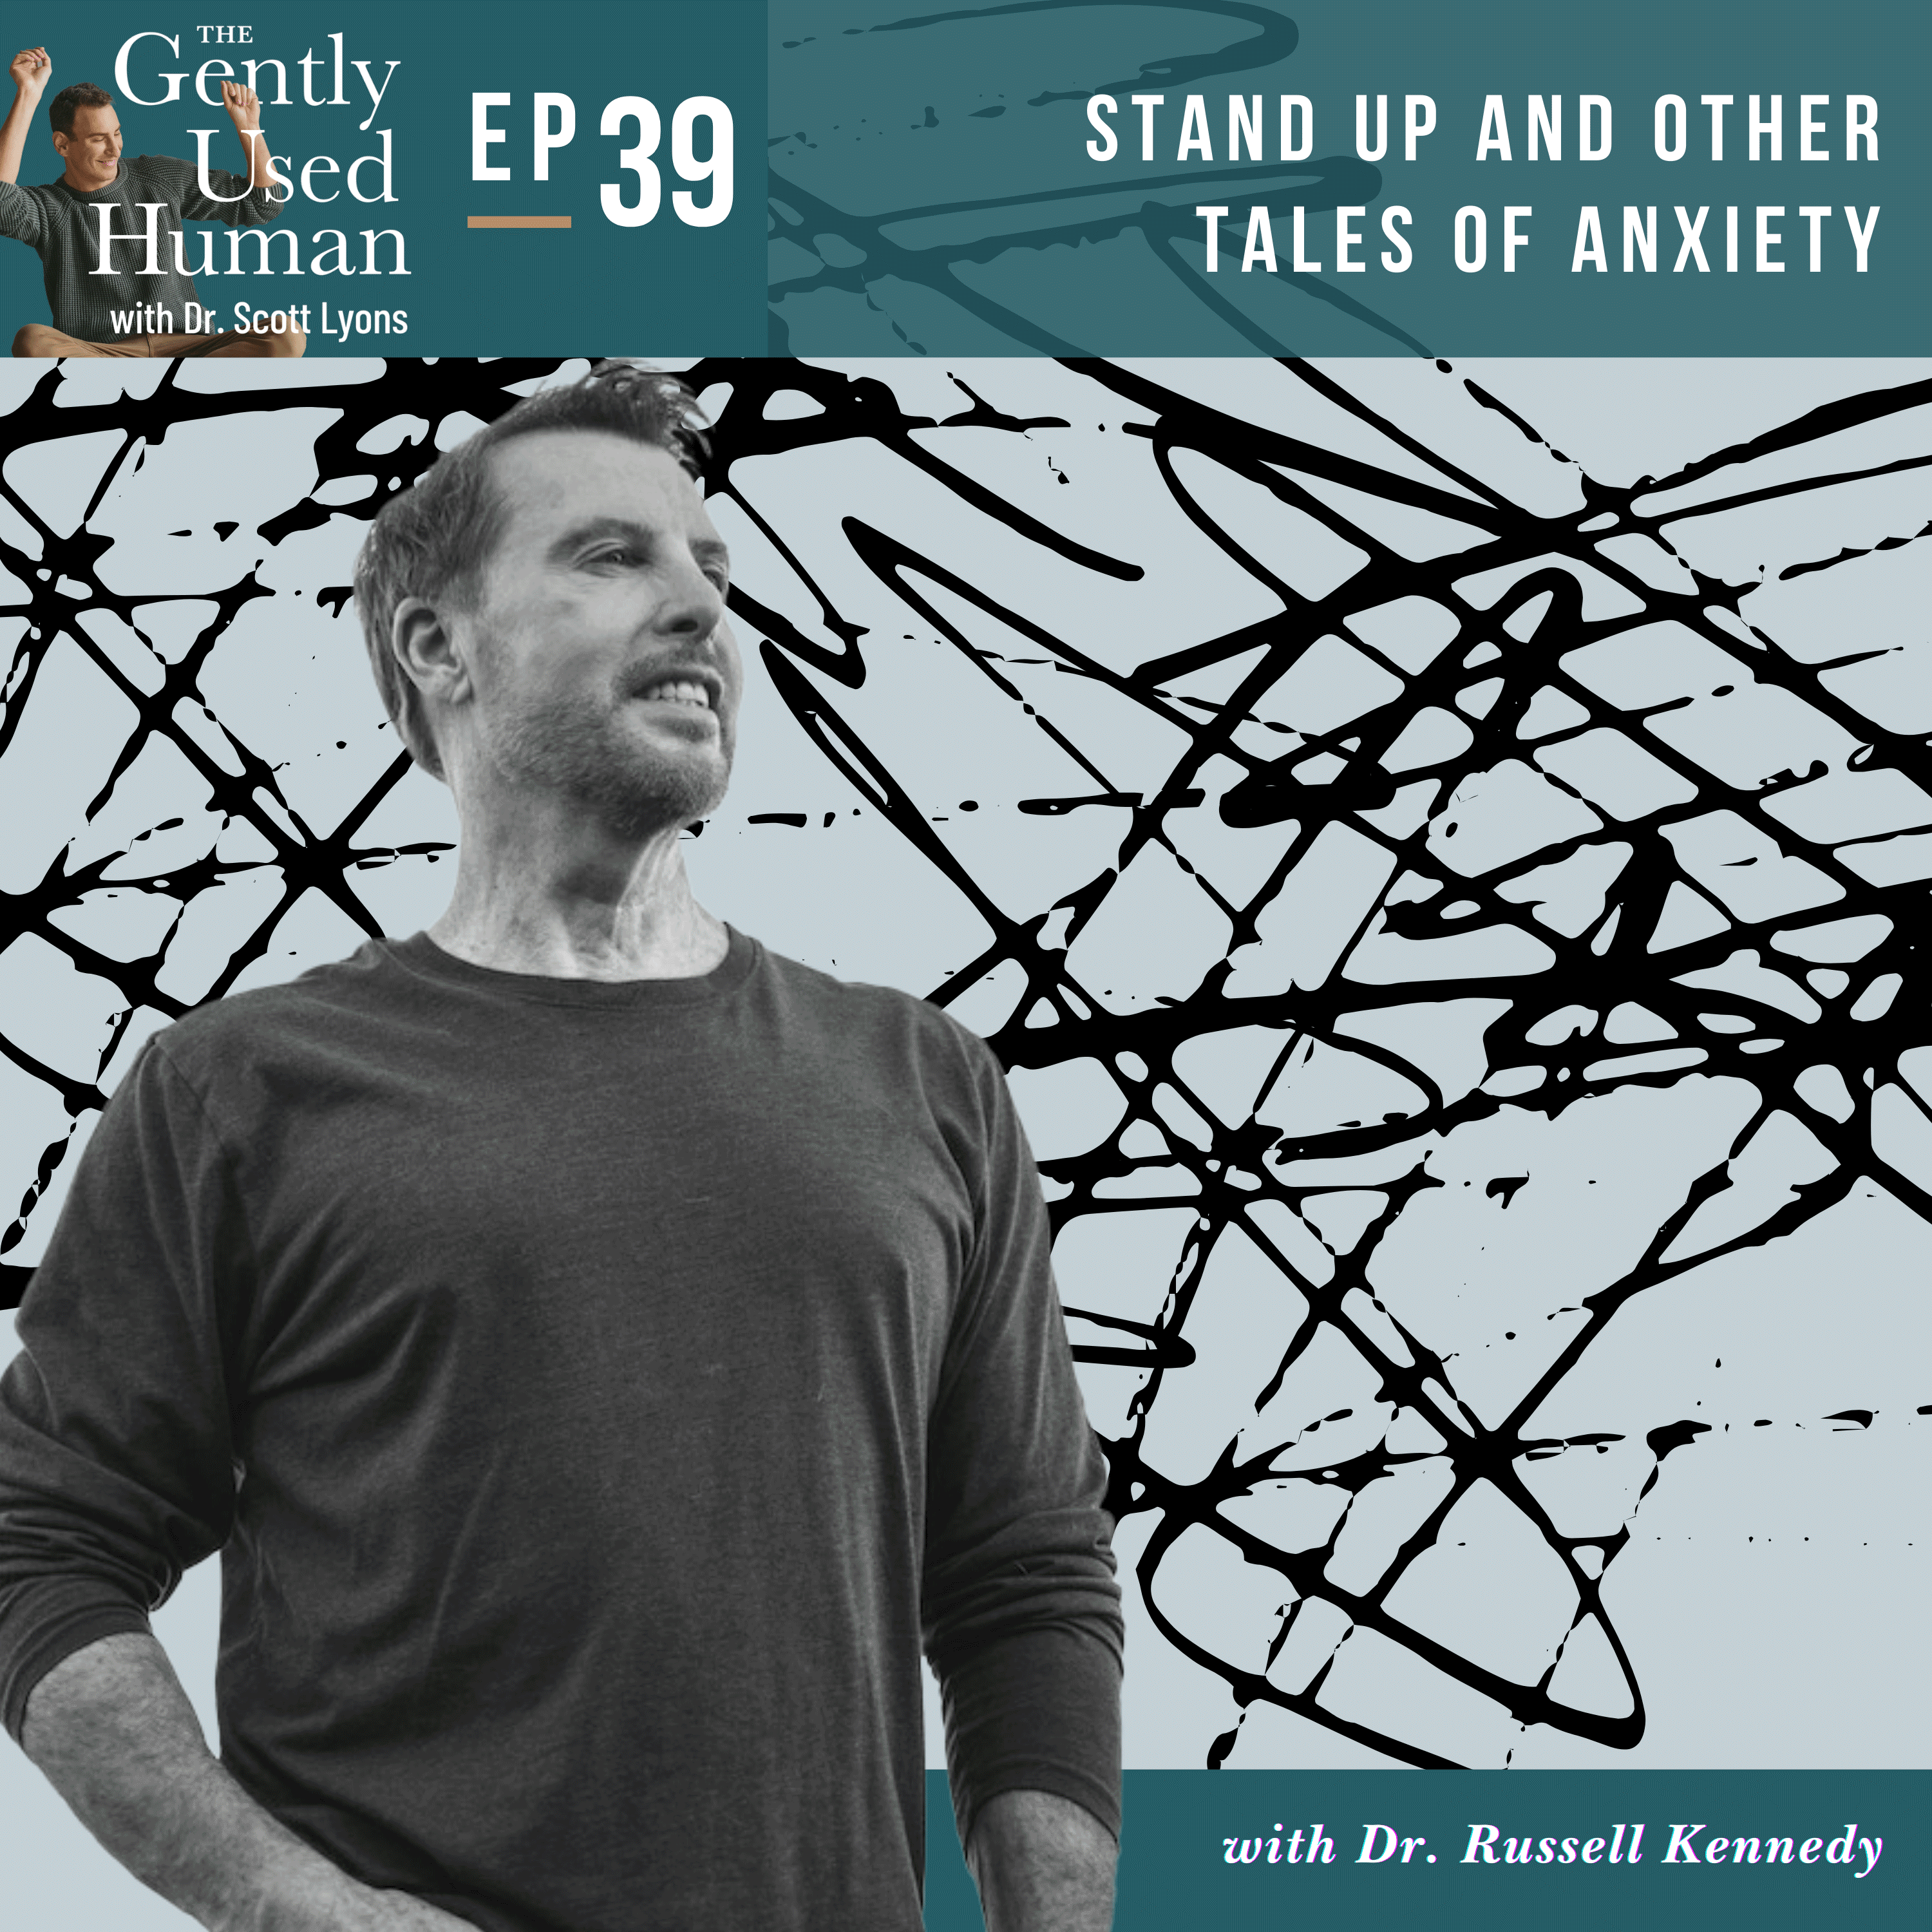 Stand Up and Other Tales of Anxiety with Dr. Russell Kennedy